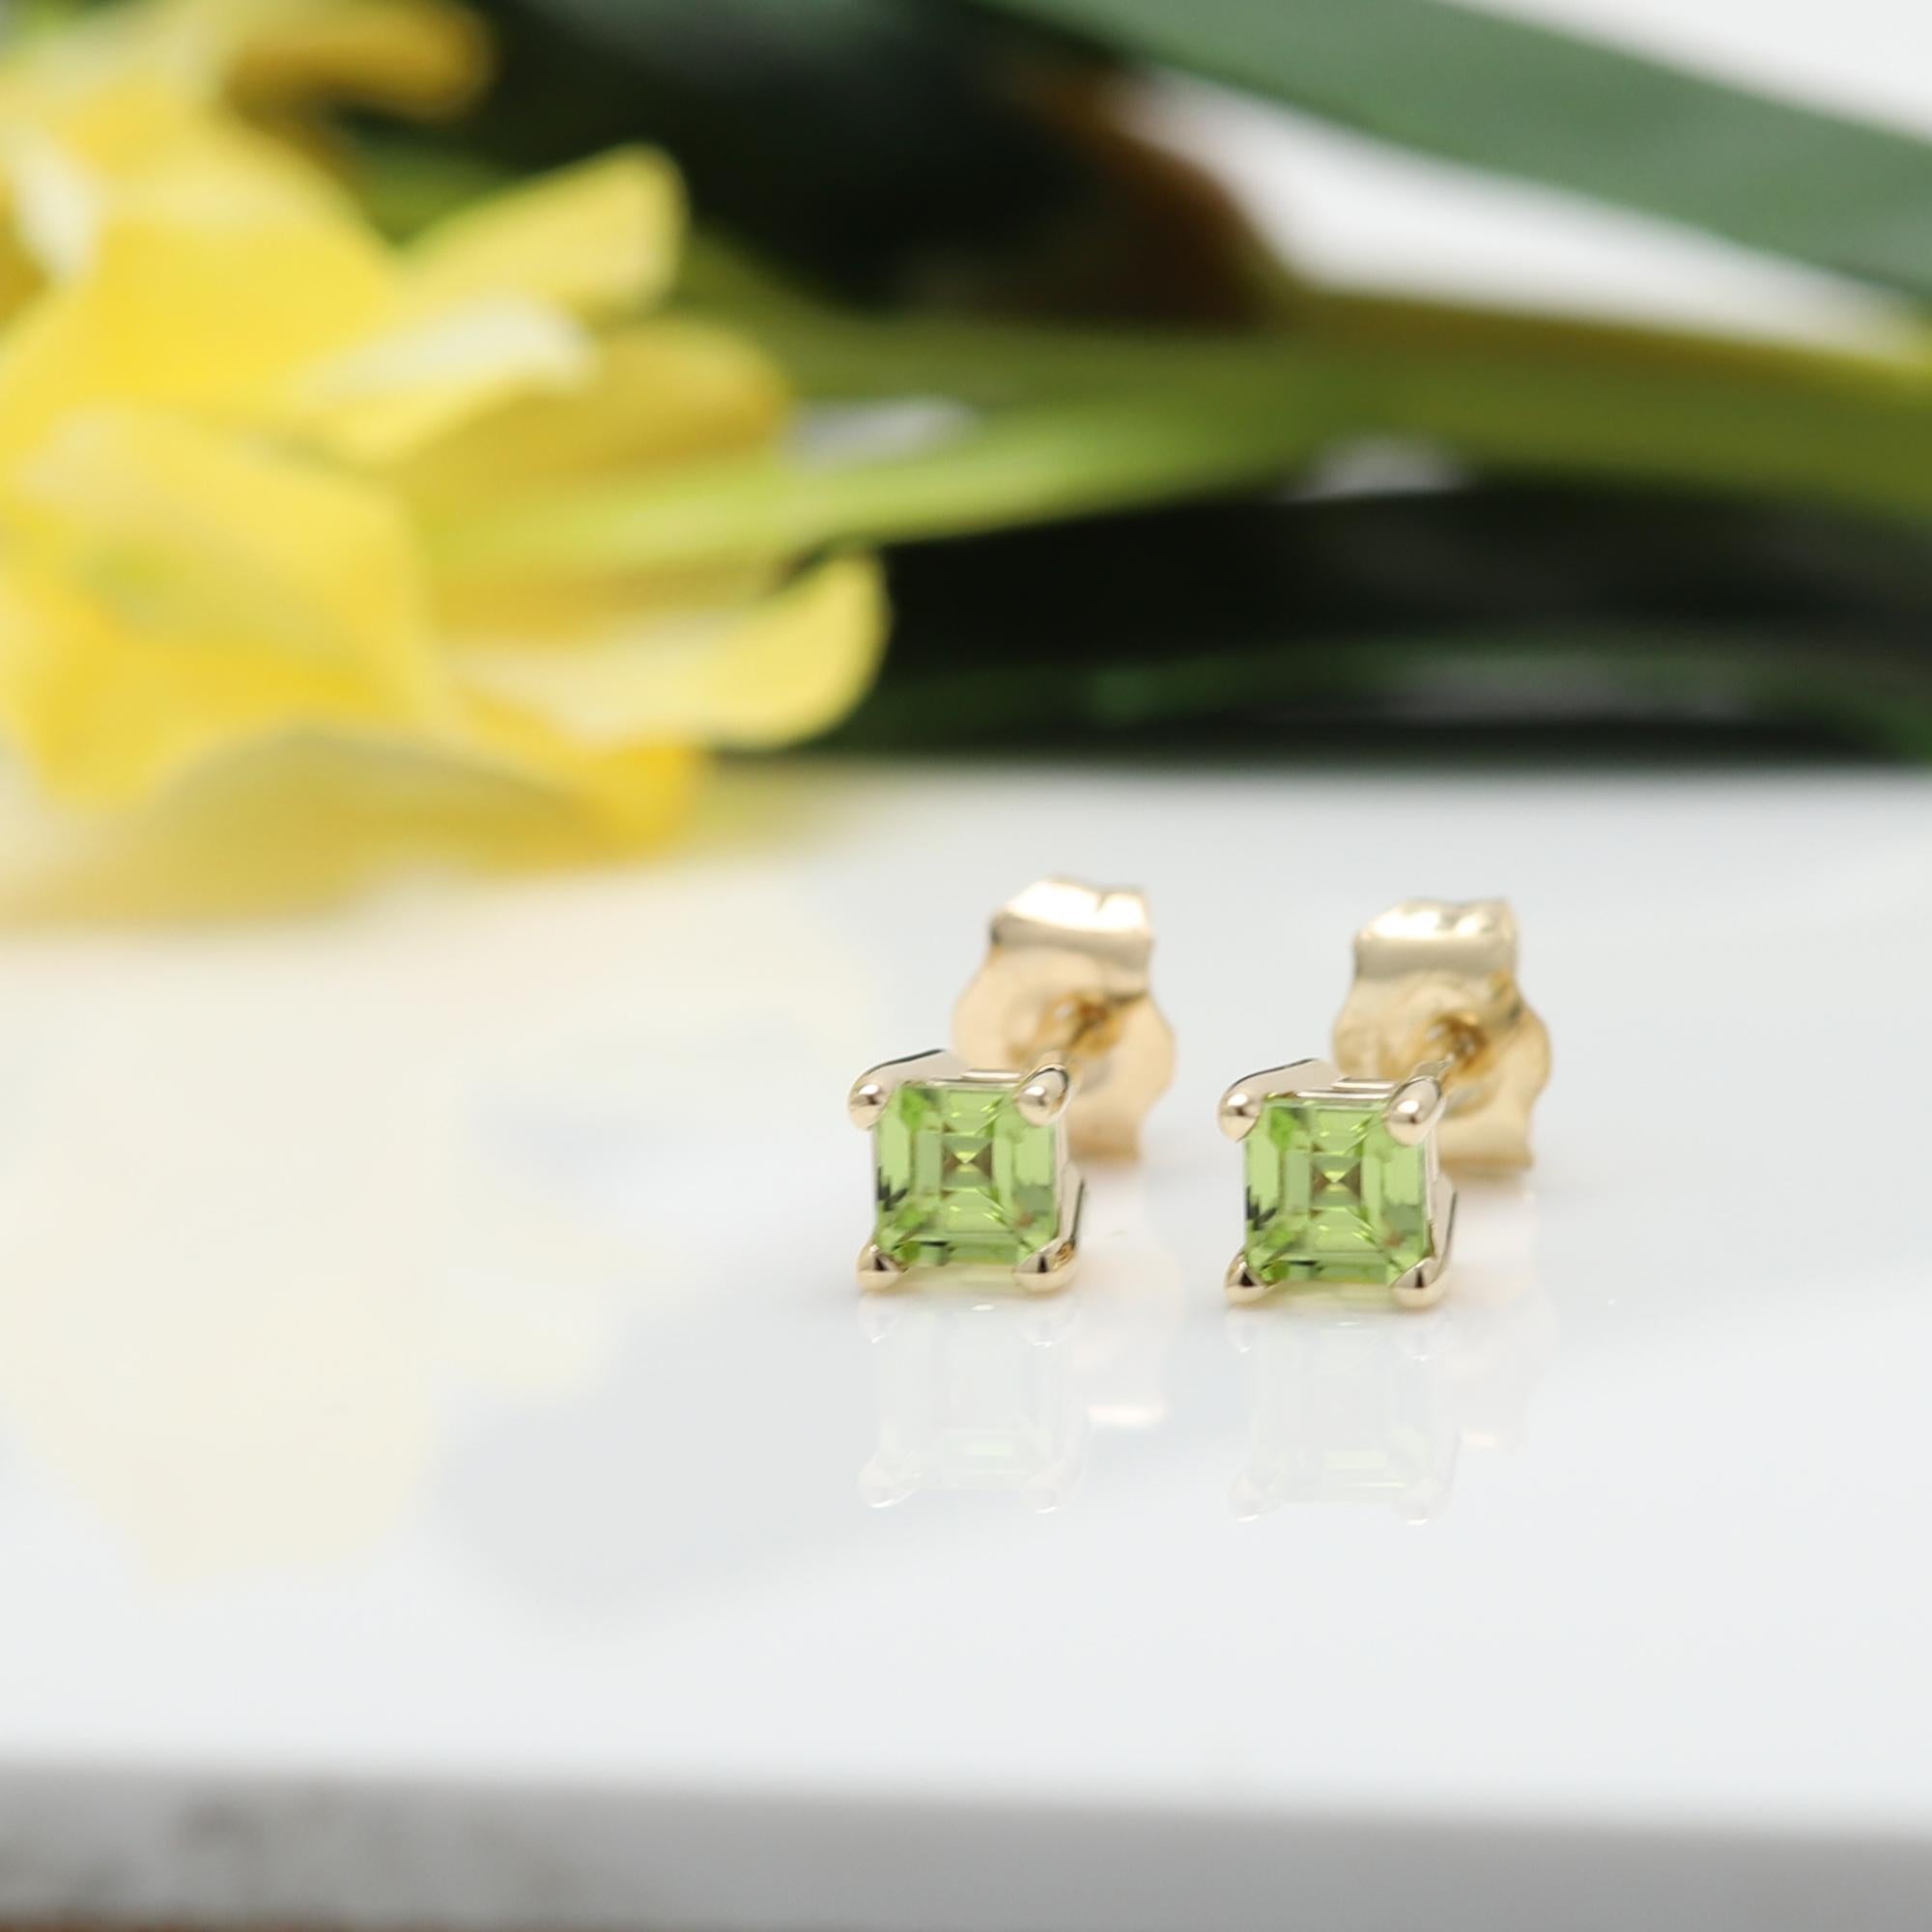 Solid 14k Yellow Gold 
Natural Green Peridot Gemstone
1 pair ( 2pieces )
each stone is 3.0 mm approx 0.20 carat 
Square shape
AA Quality Gems
due to natural formations minor inclusions or imperfections may occur
Good for any age
+Gift Box
